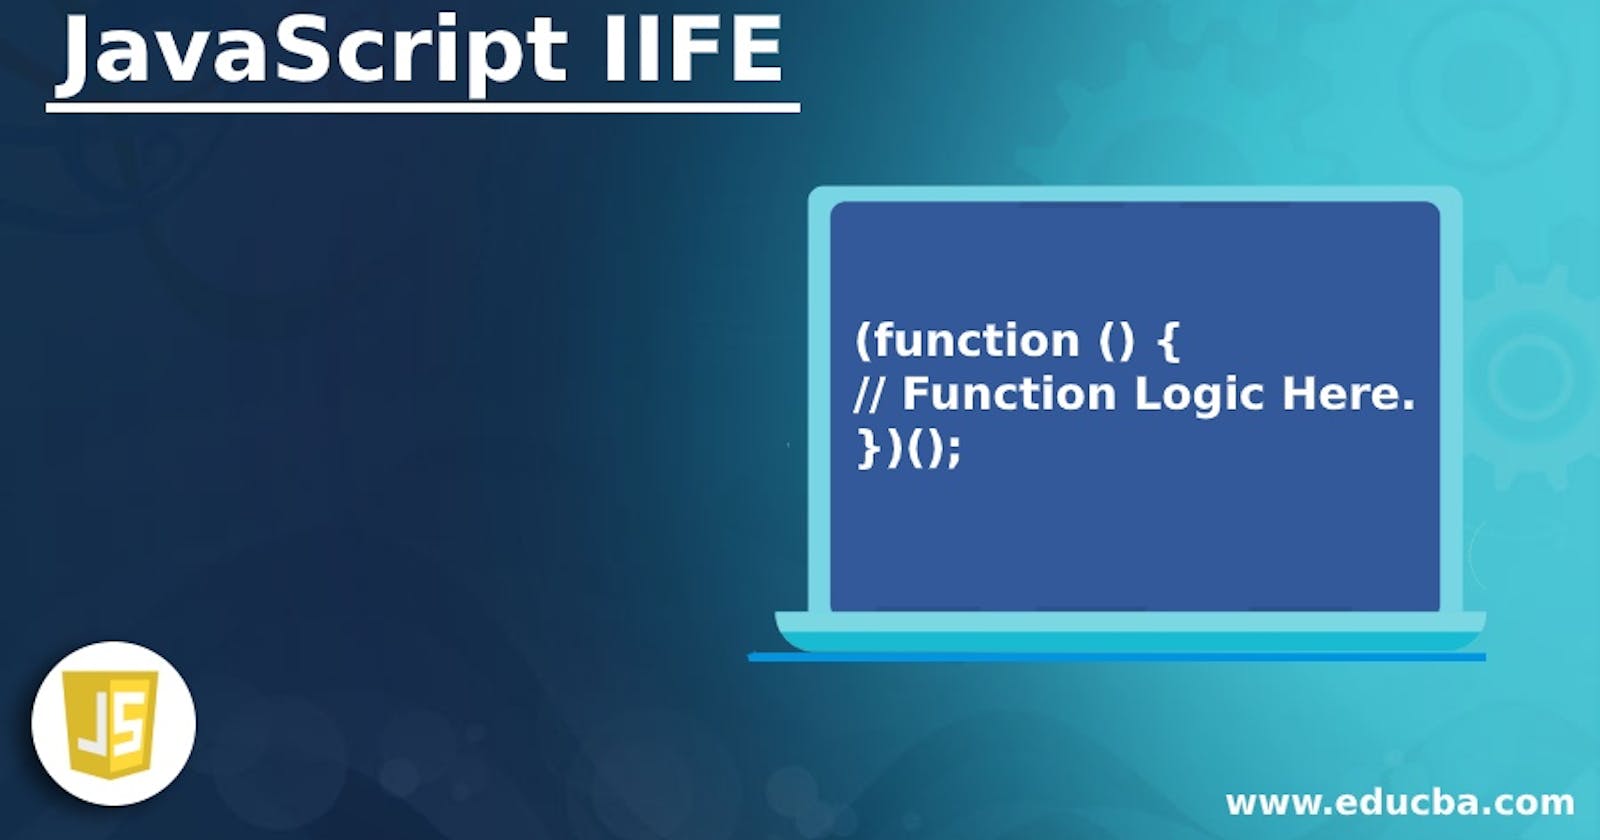 What is an IFFE in JavaScript?